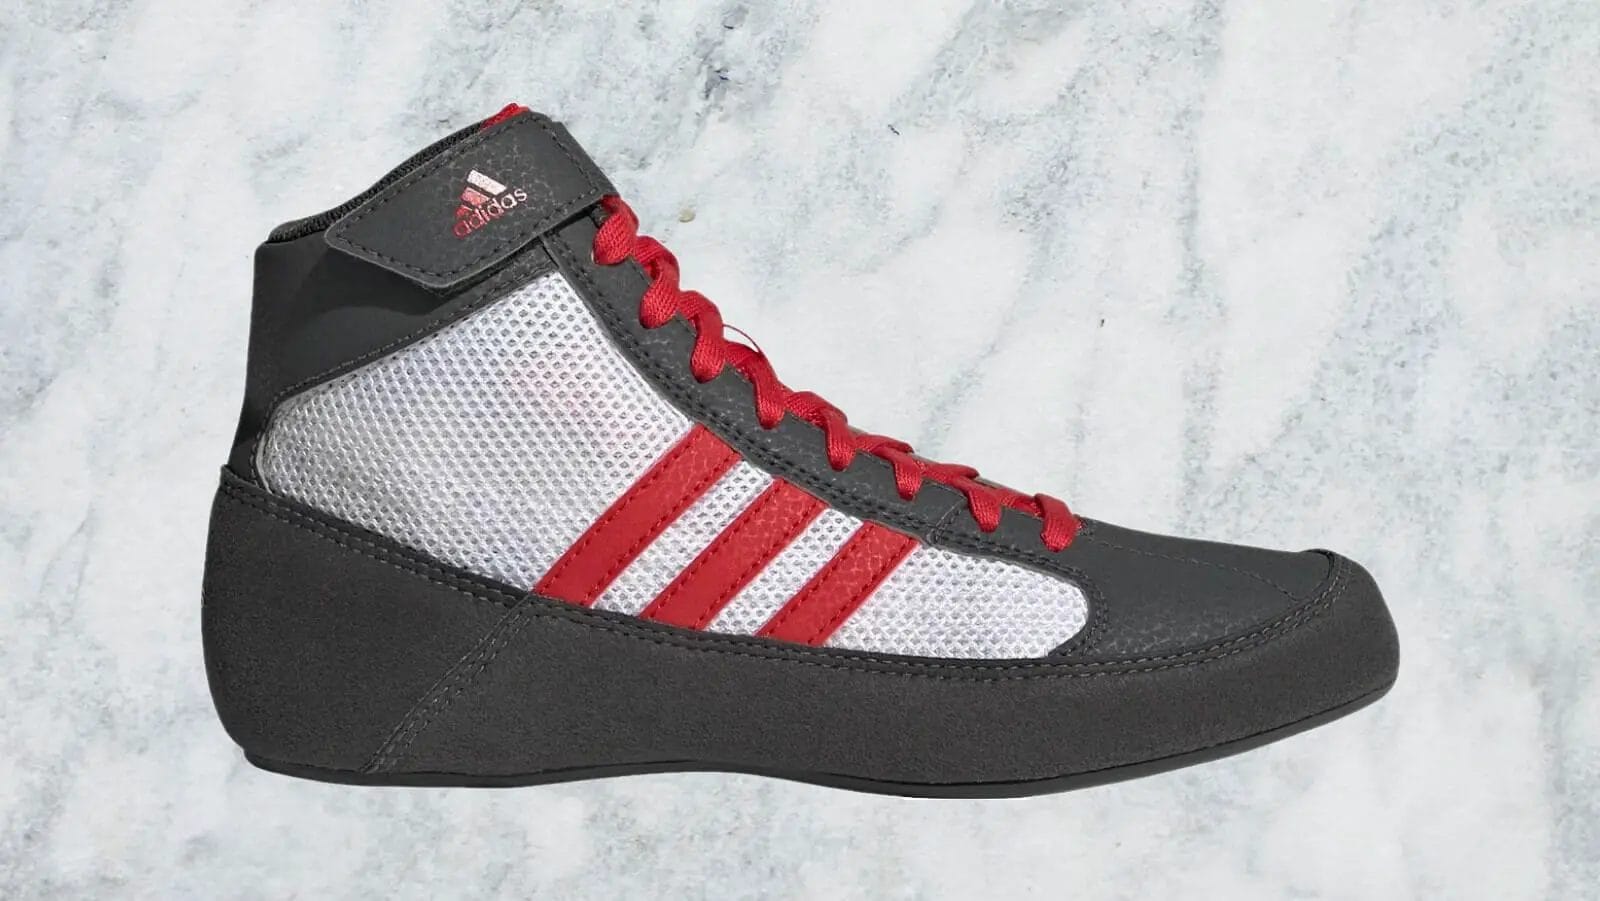 adidas HVC 2 red and grey shoes for mat work.